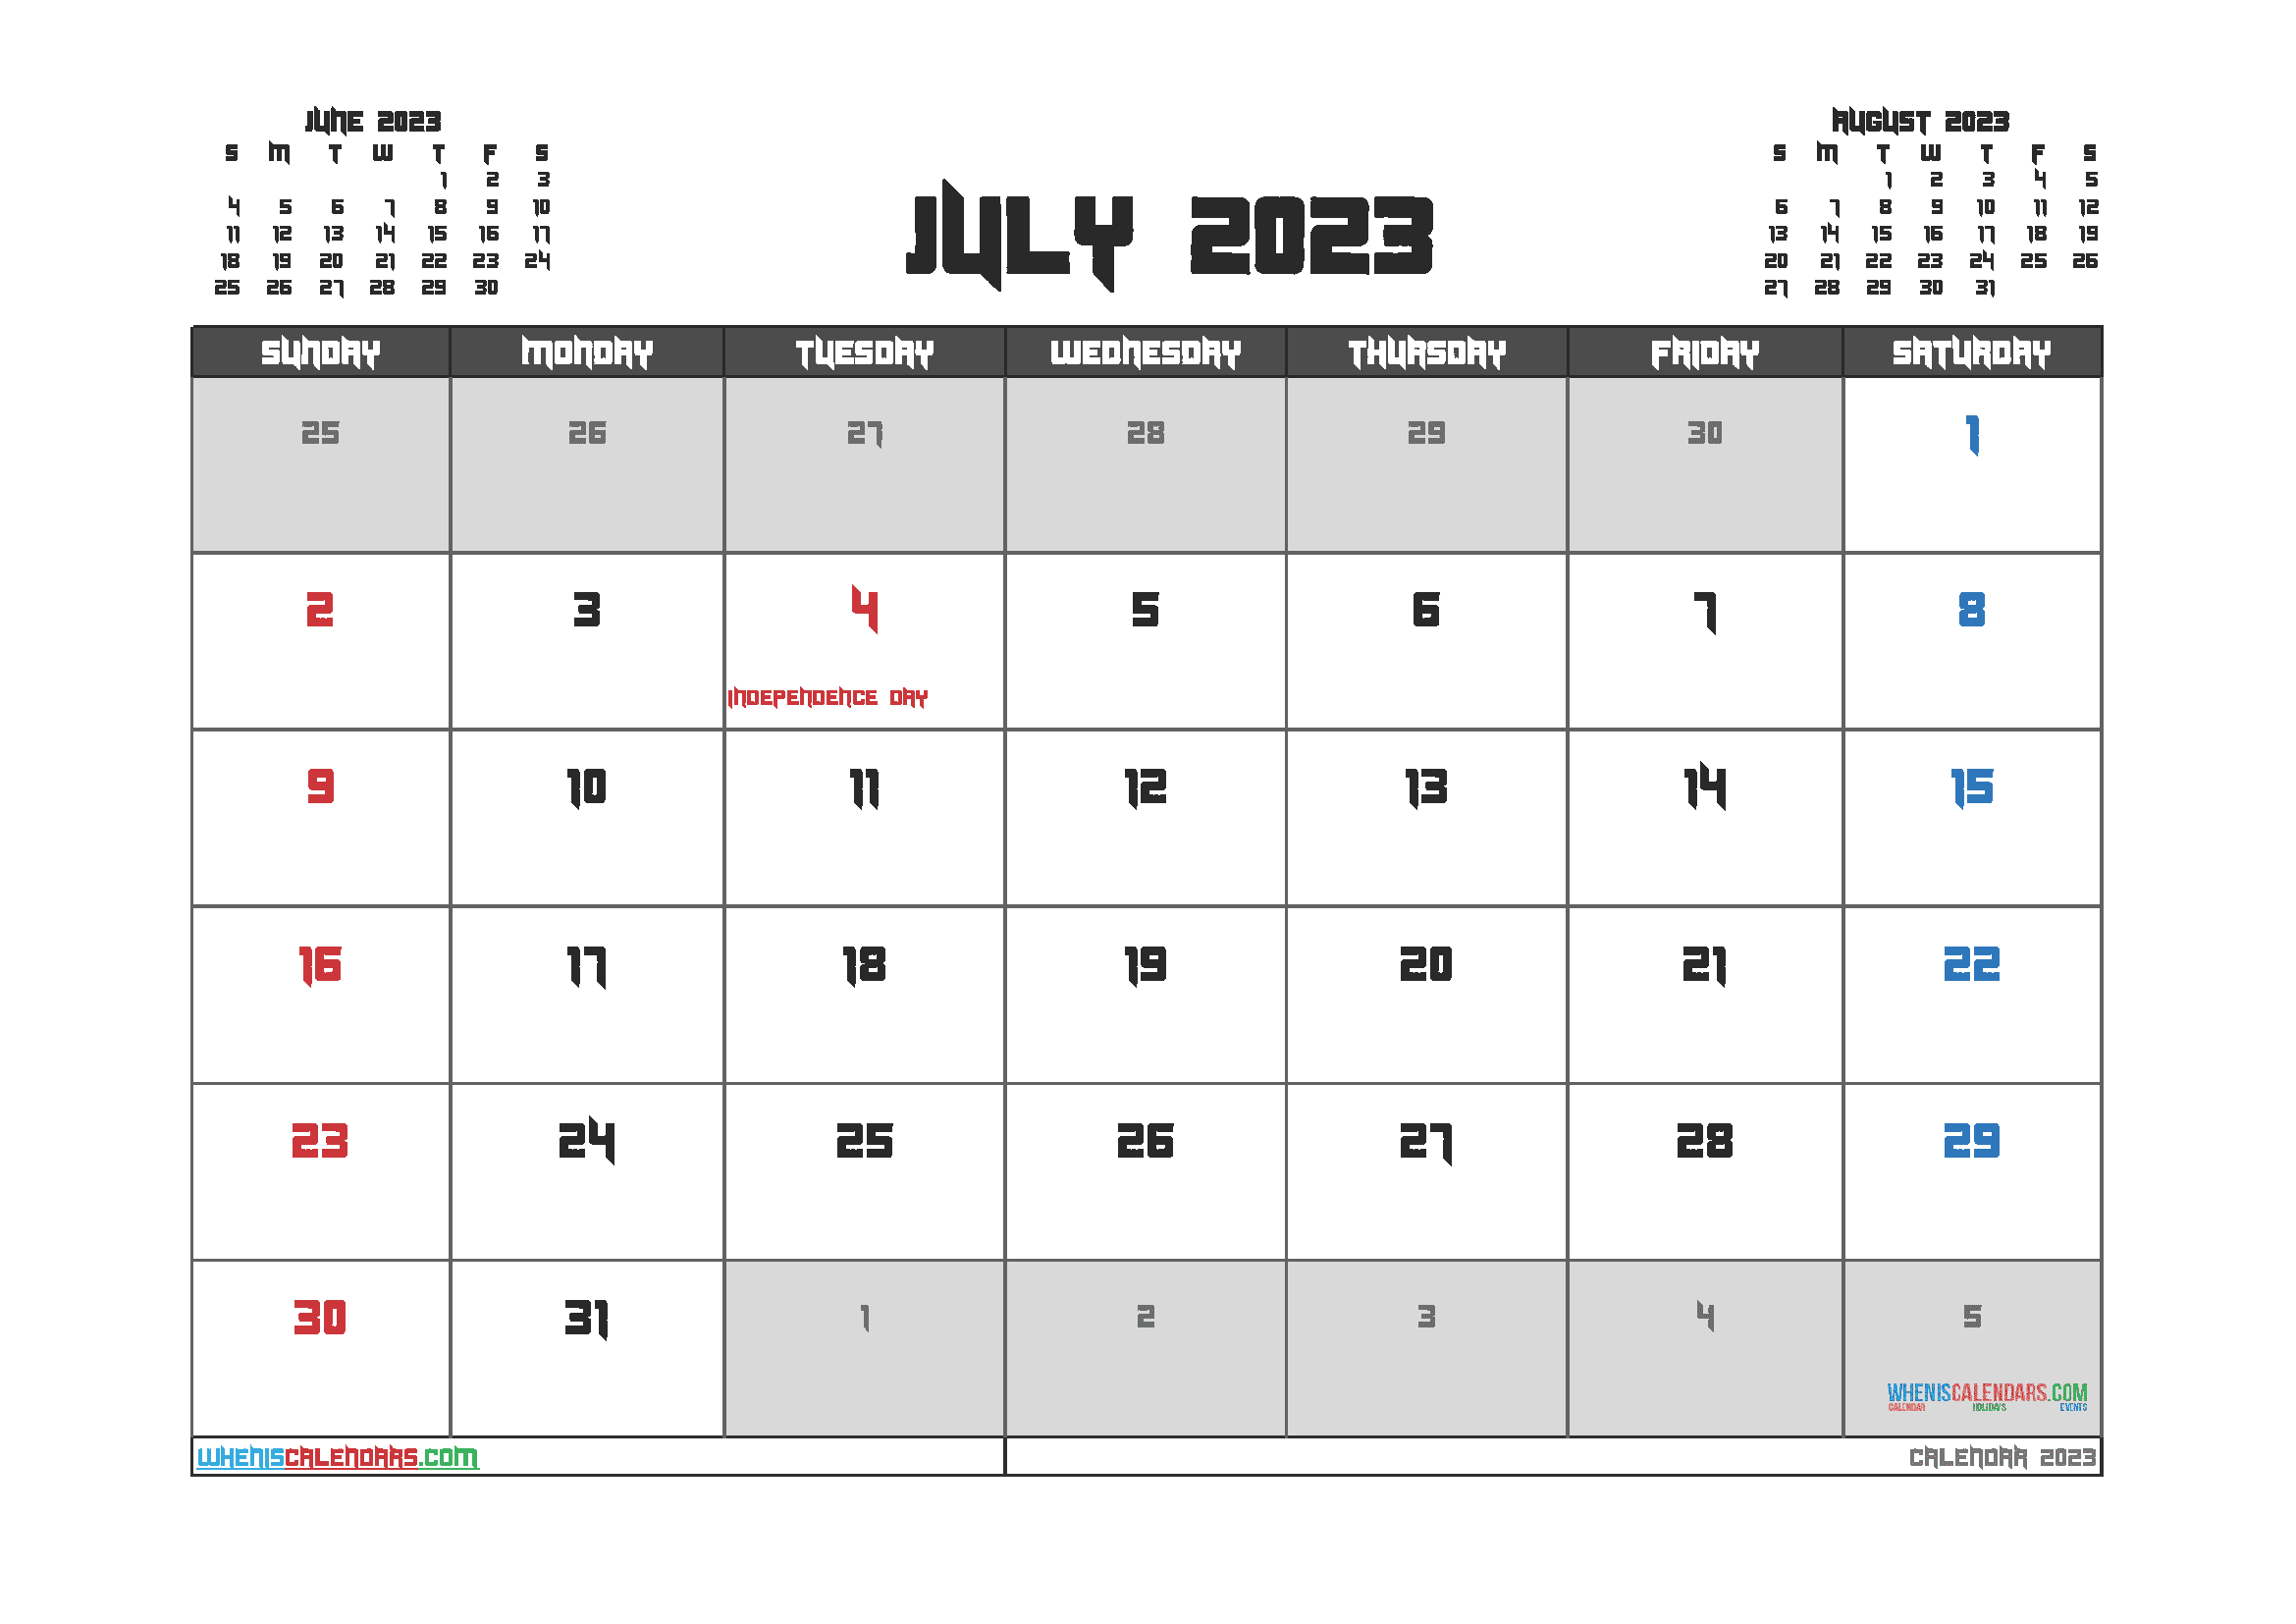 Free Printable Calendar 2023 July with Holidays PDF in Landscape